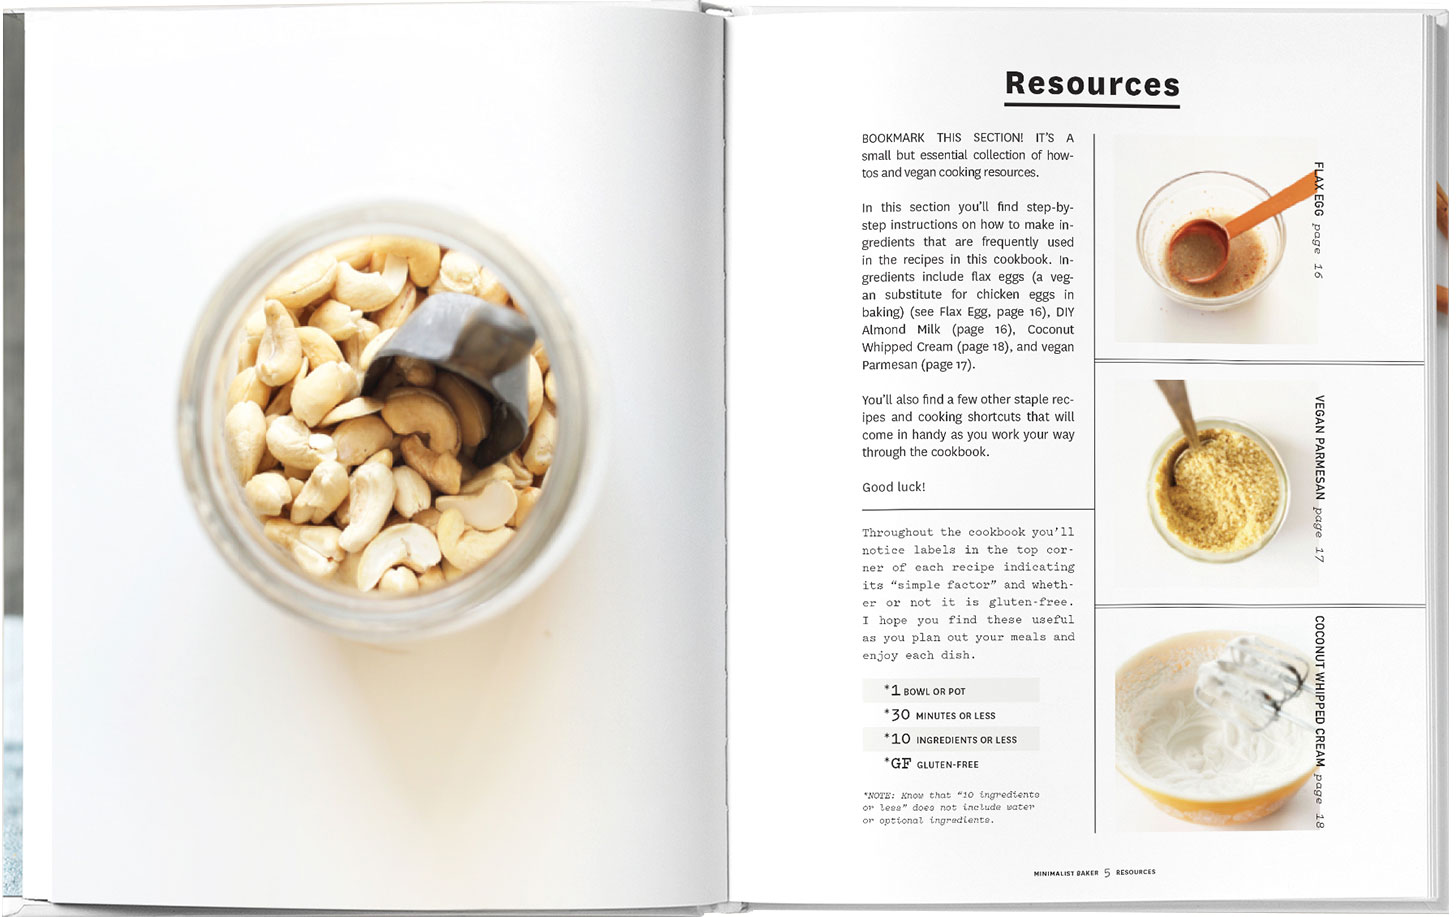 Resources section of our Everyday Cooking Cookbook